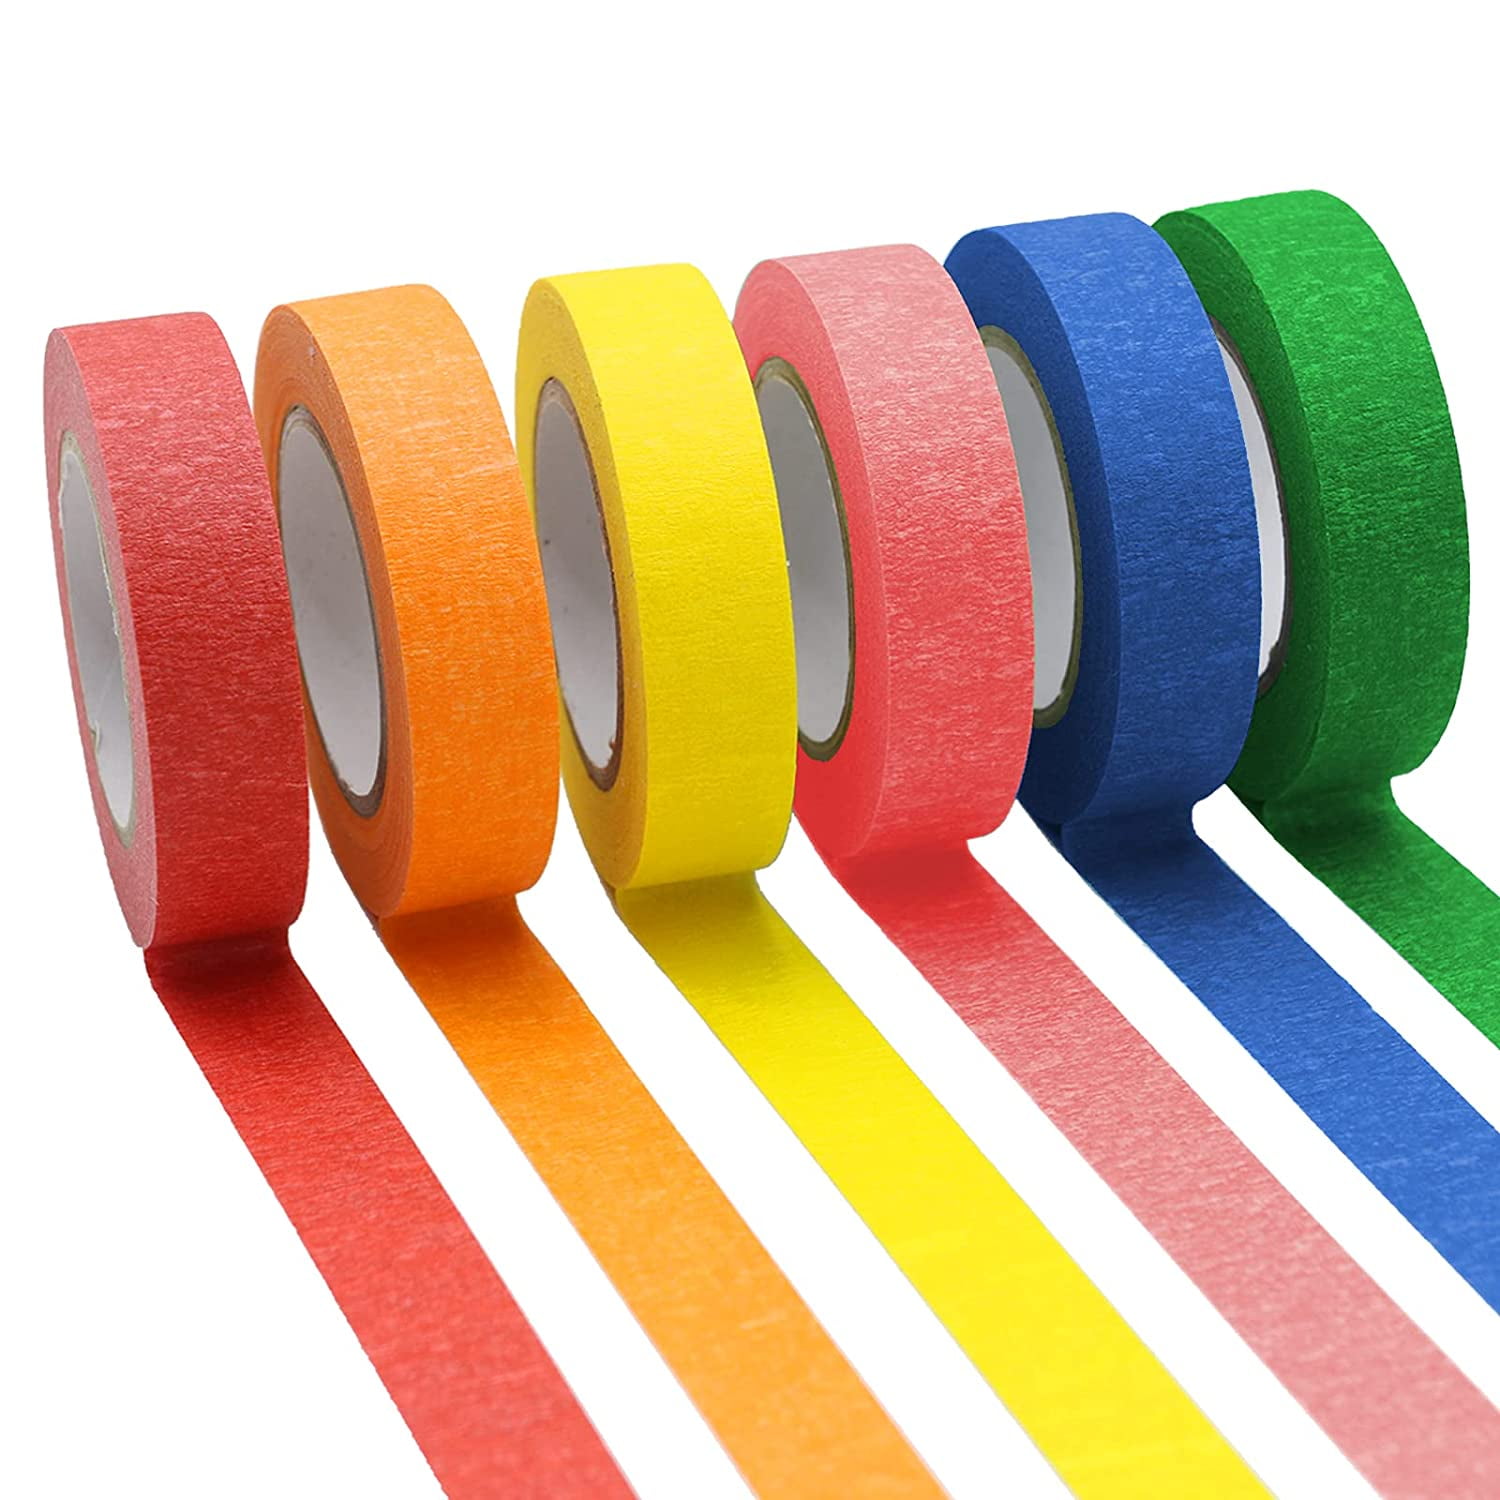 Colored Masking Tape 16 Yard Per Roll, 6 Rolls Rainbow Colors Painting  Tape, Painters Tape, Craft Tape, Labeling Tape, Paper Tape for Bullet  Journals